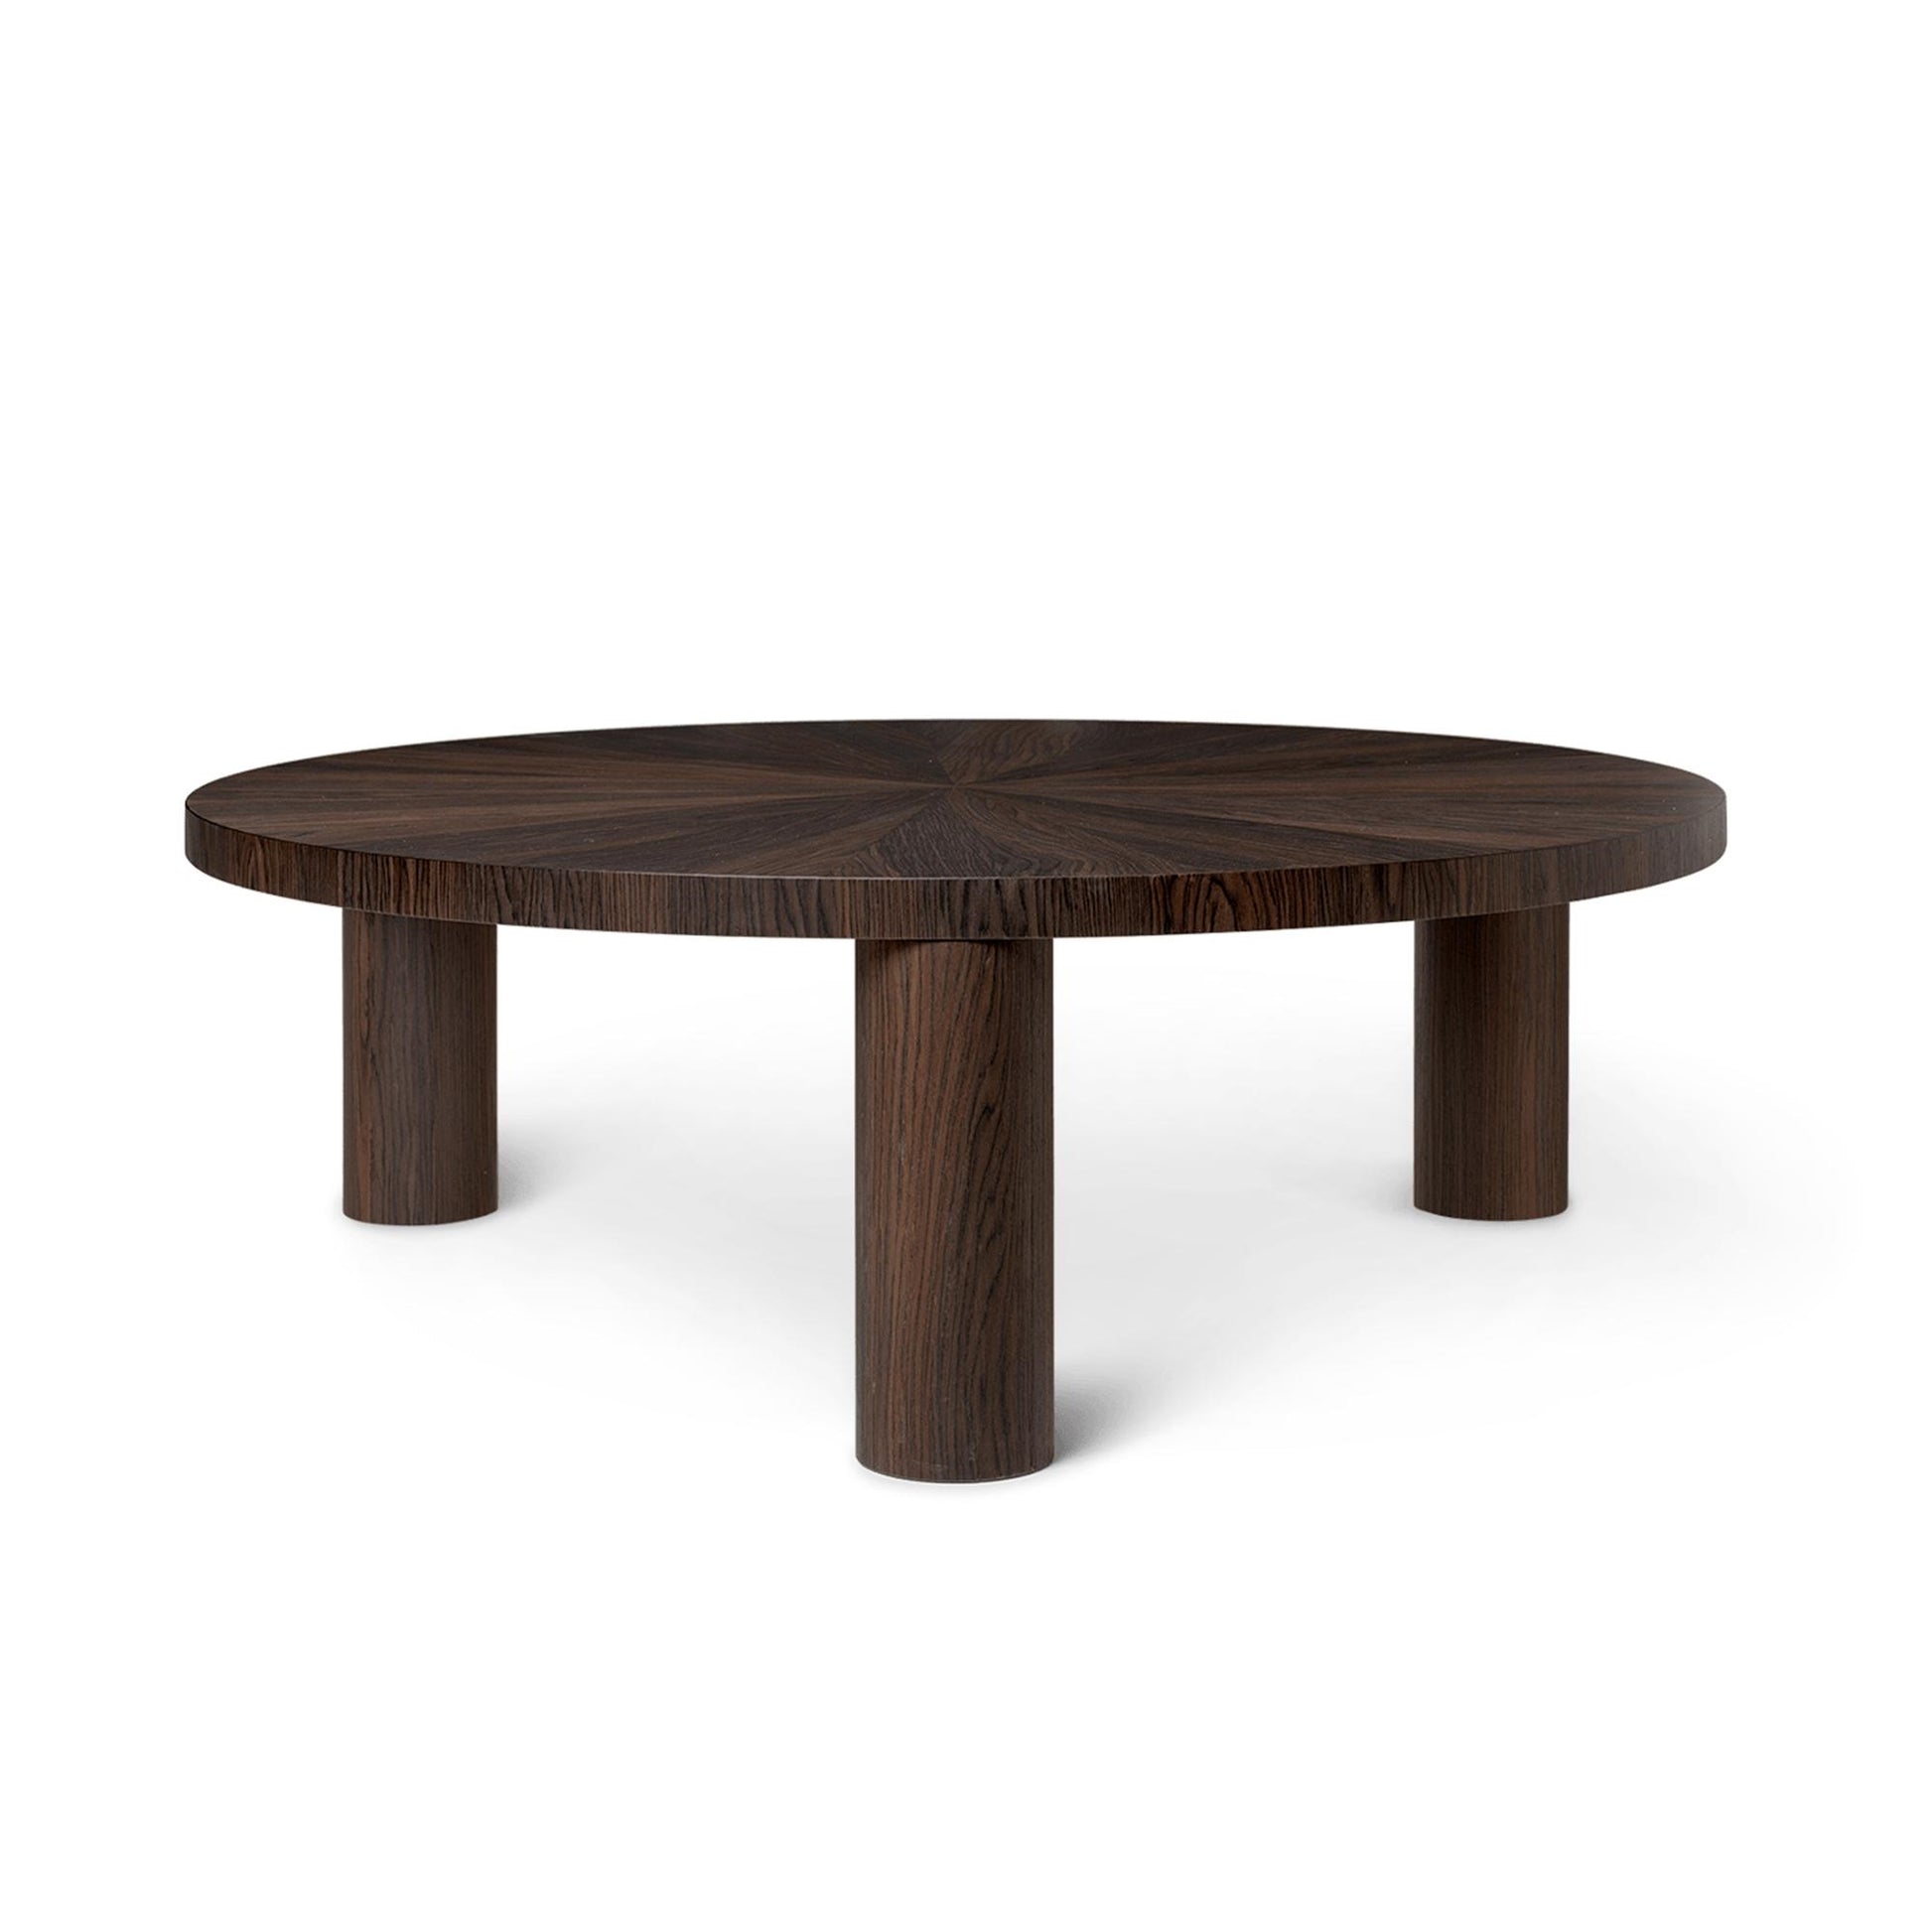 Post Star Coffee Table Large Smoked Oak by Ferm Living #Smoked Oak